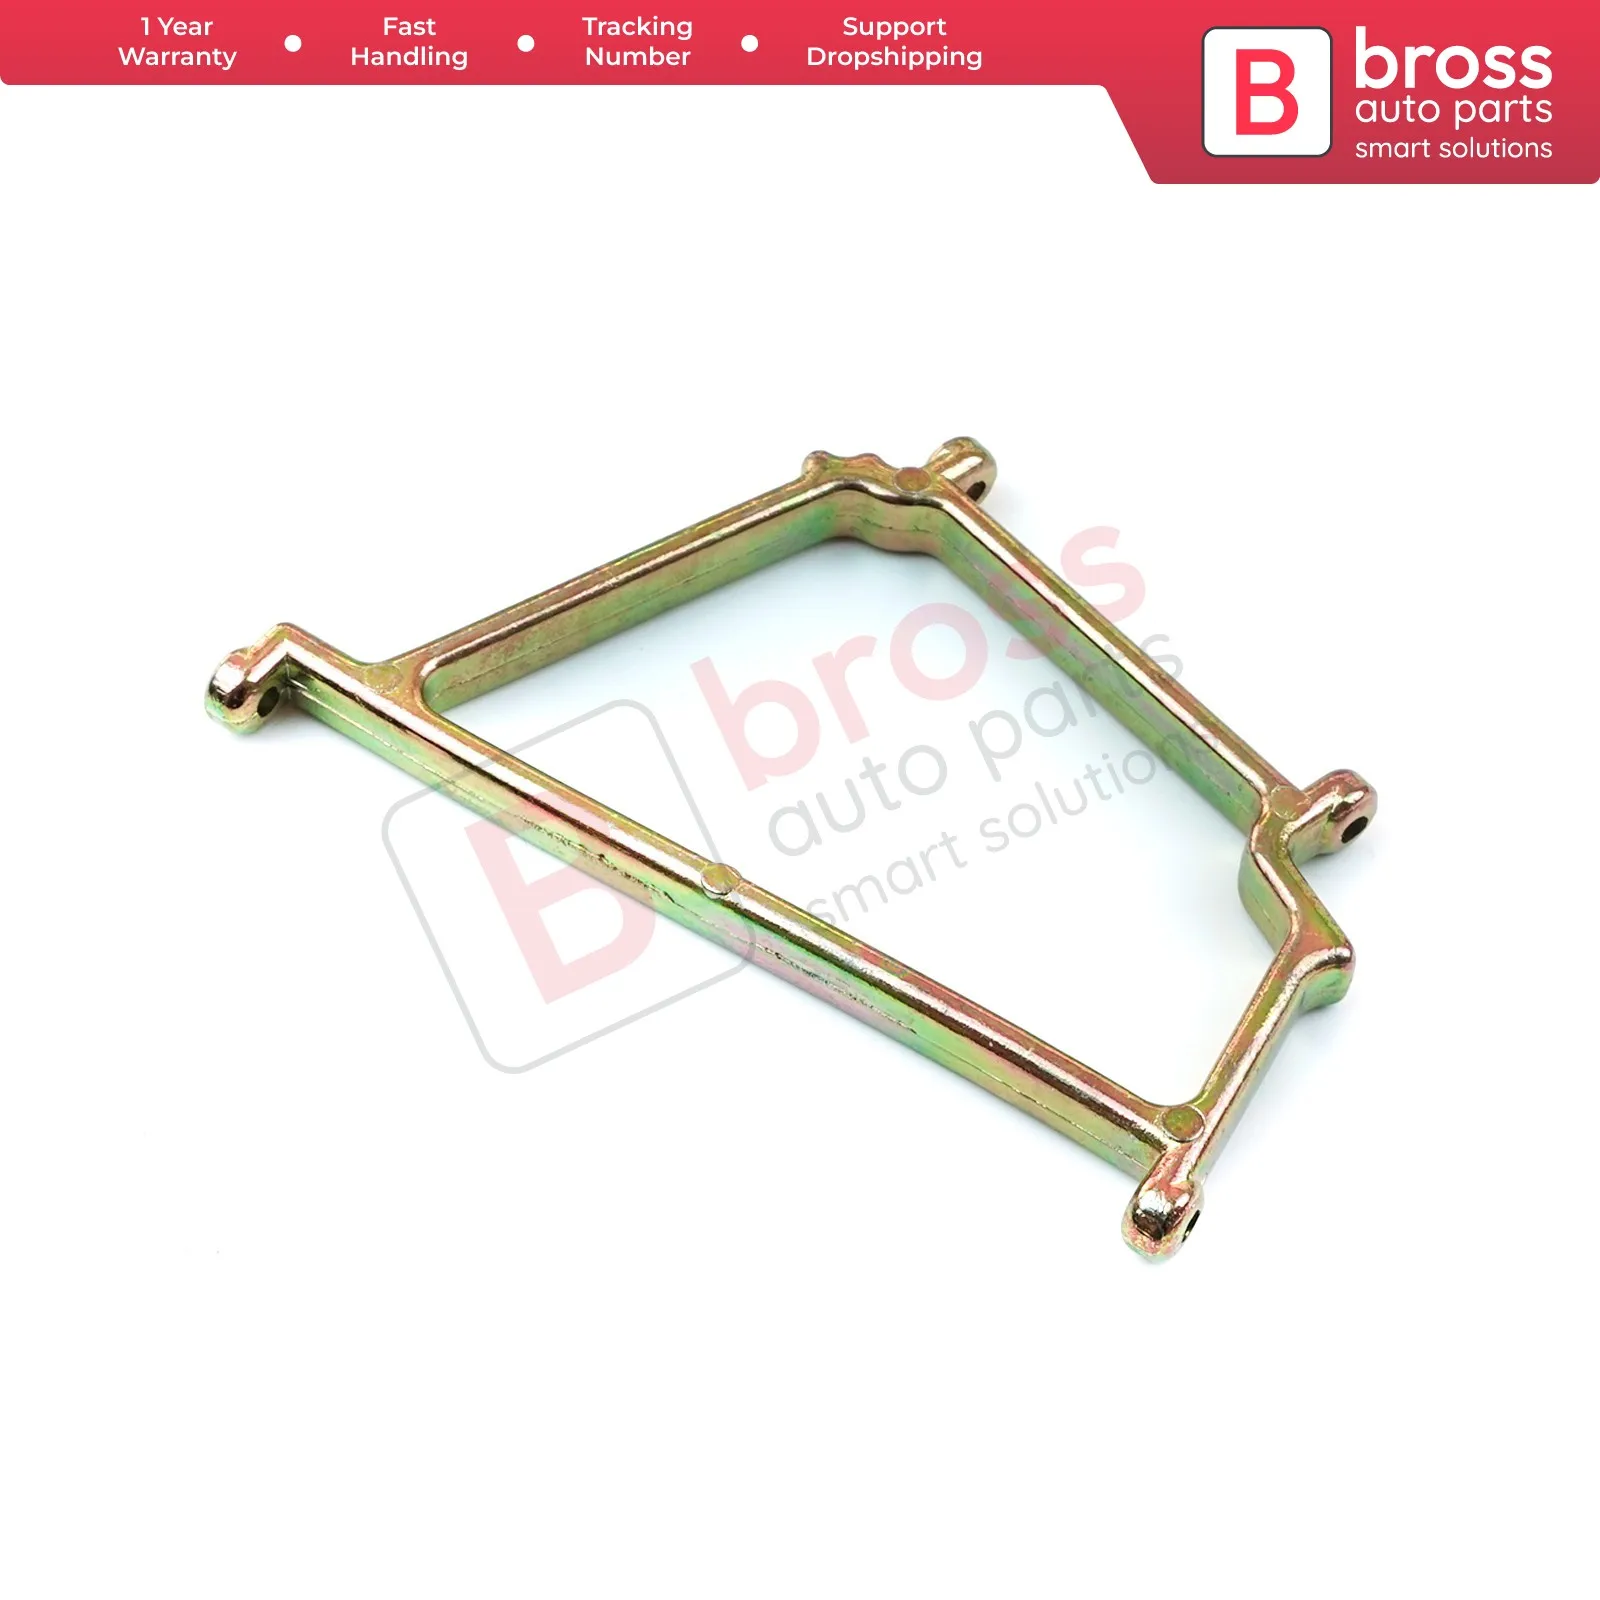 

Bross Auto Parts BSP26 Side Mirror Arm For Mercedes Fast Shipment Free Shipment Ship From Turkey Made in Turkey